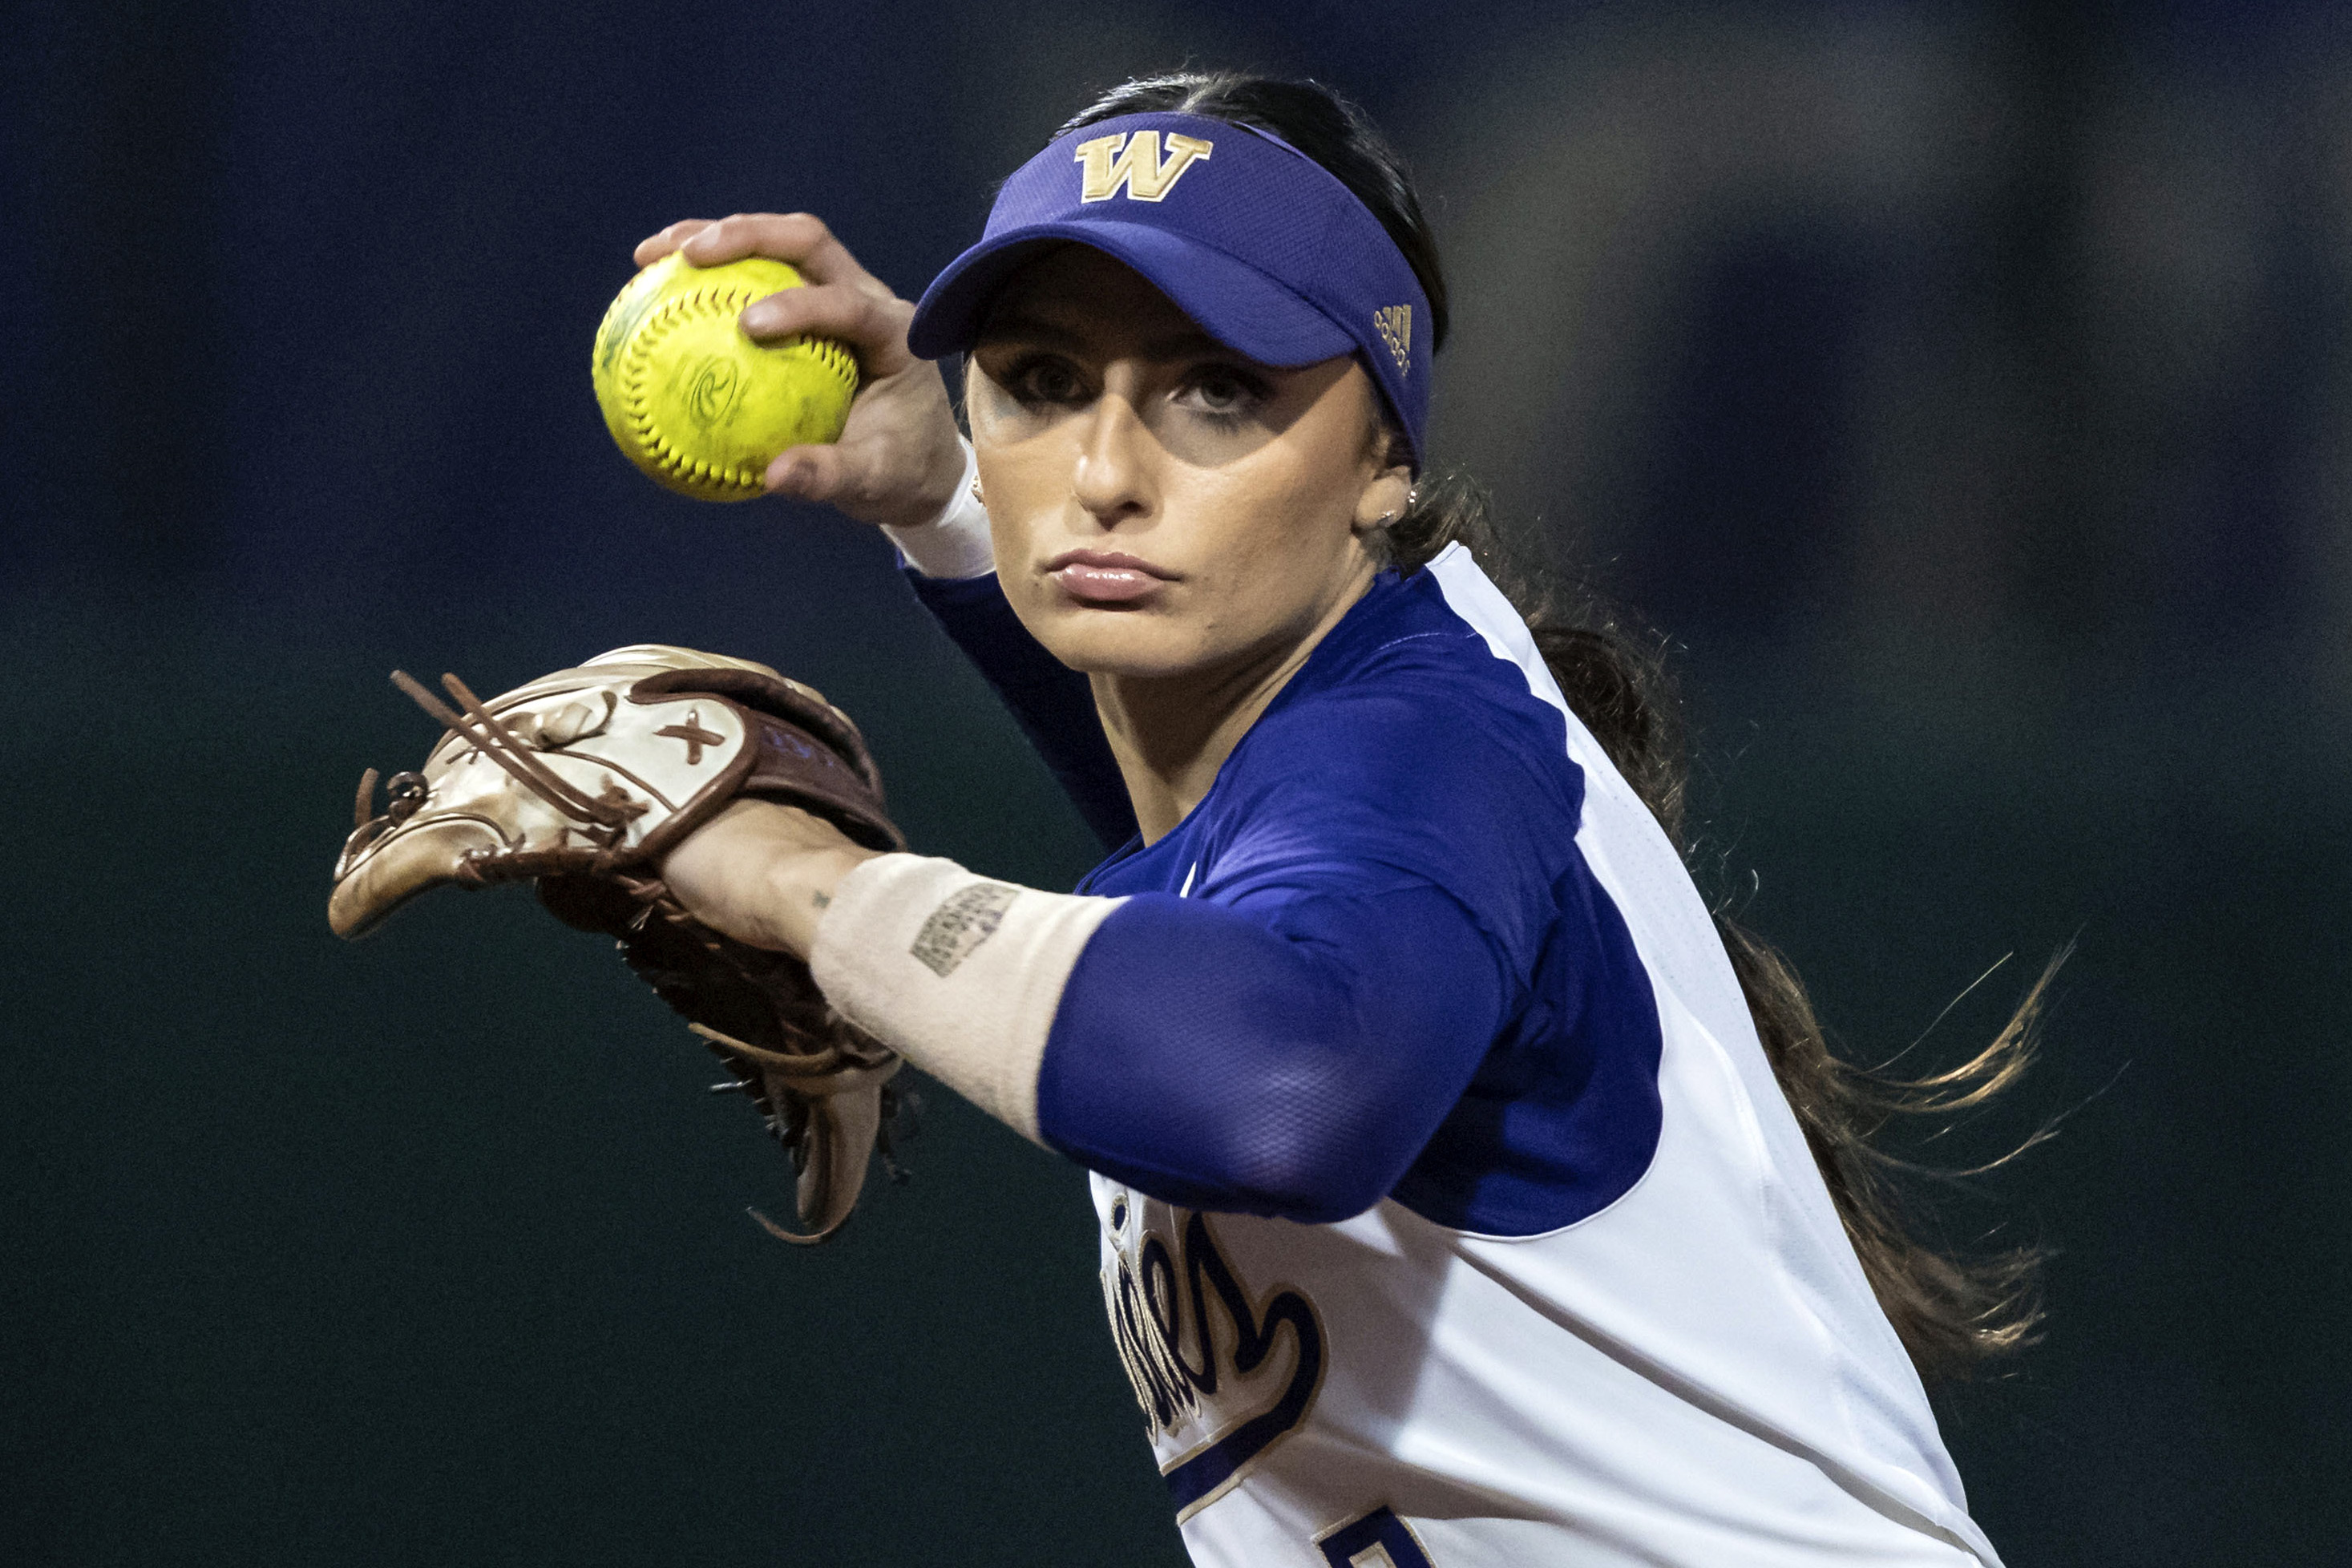 Womens College World Series 2023 TV schedule FREE live streams, bracket, TV channels for NCAA softball National Championship Watch WCWS online